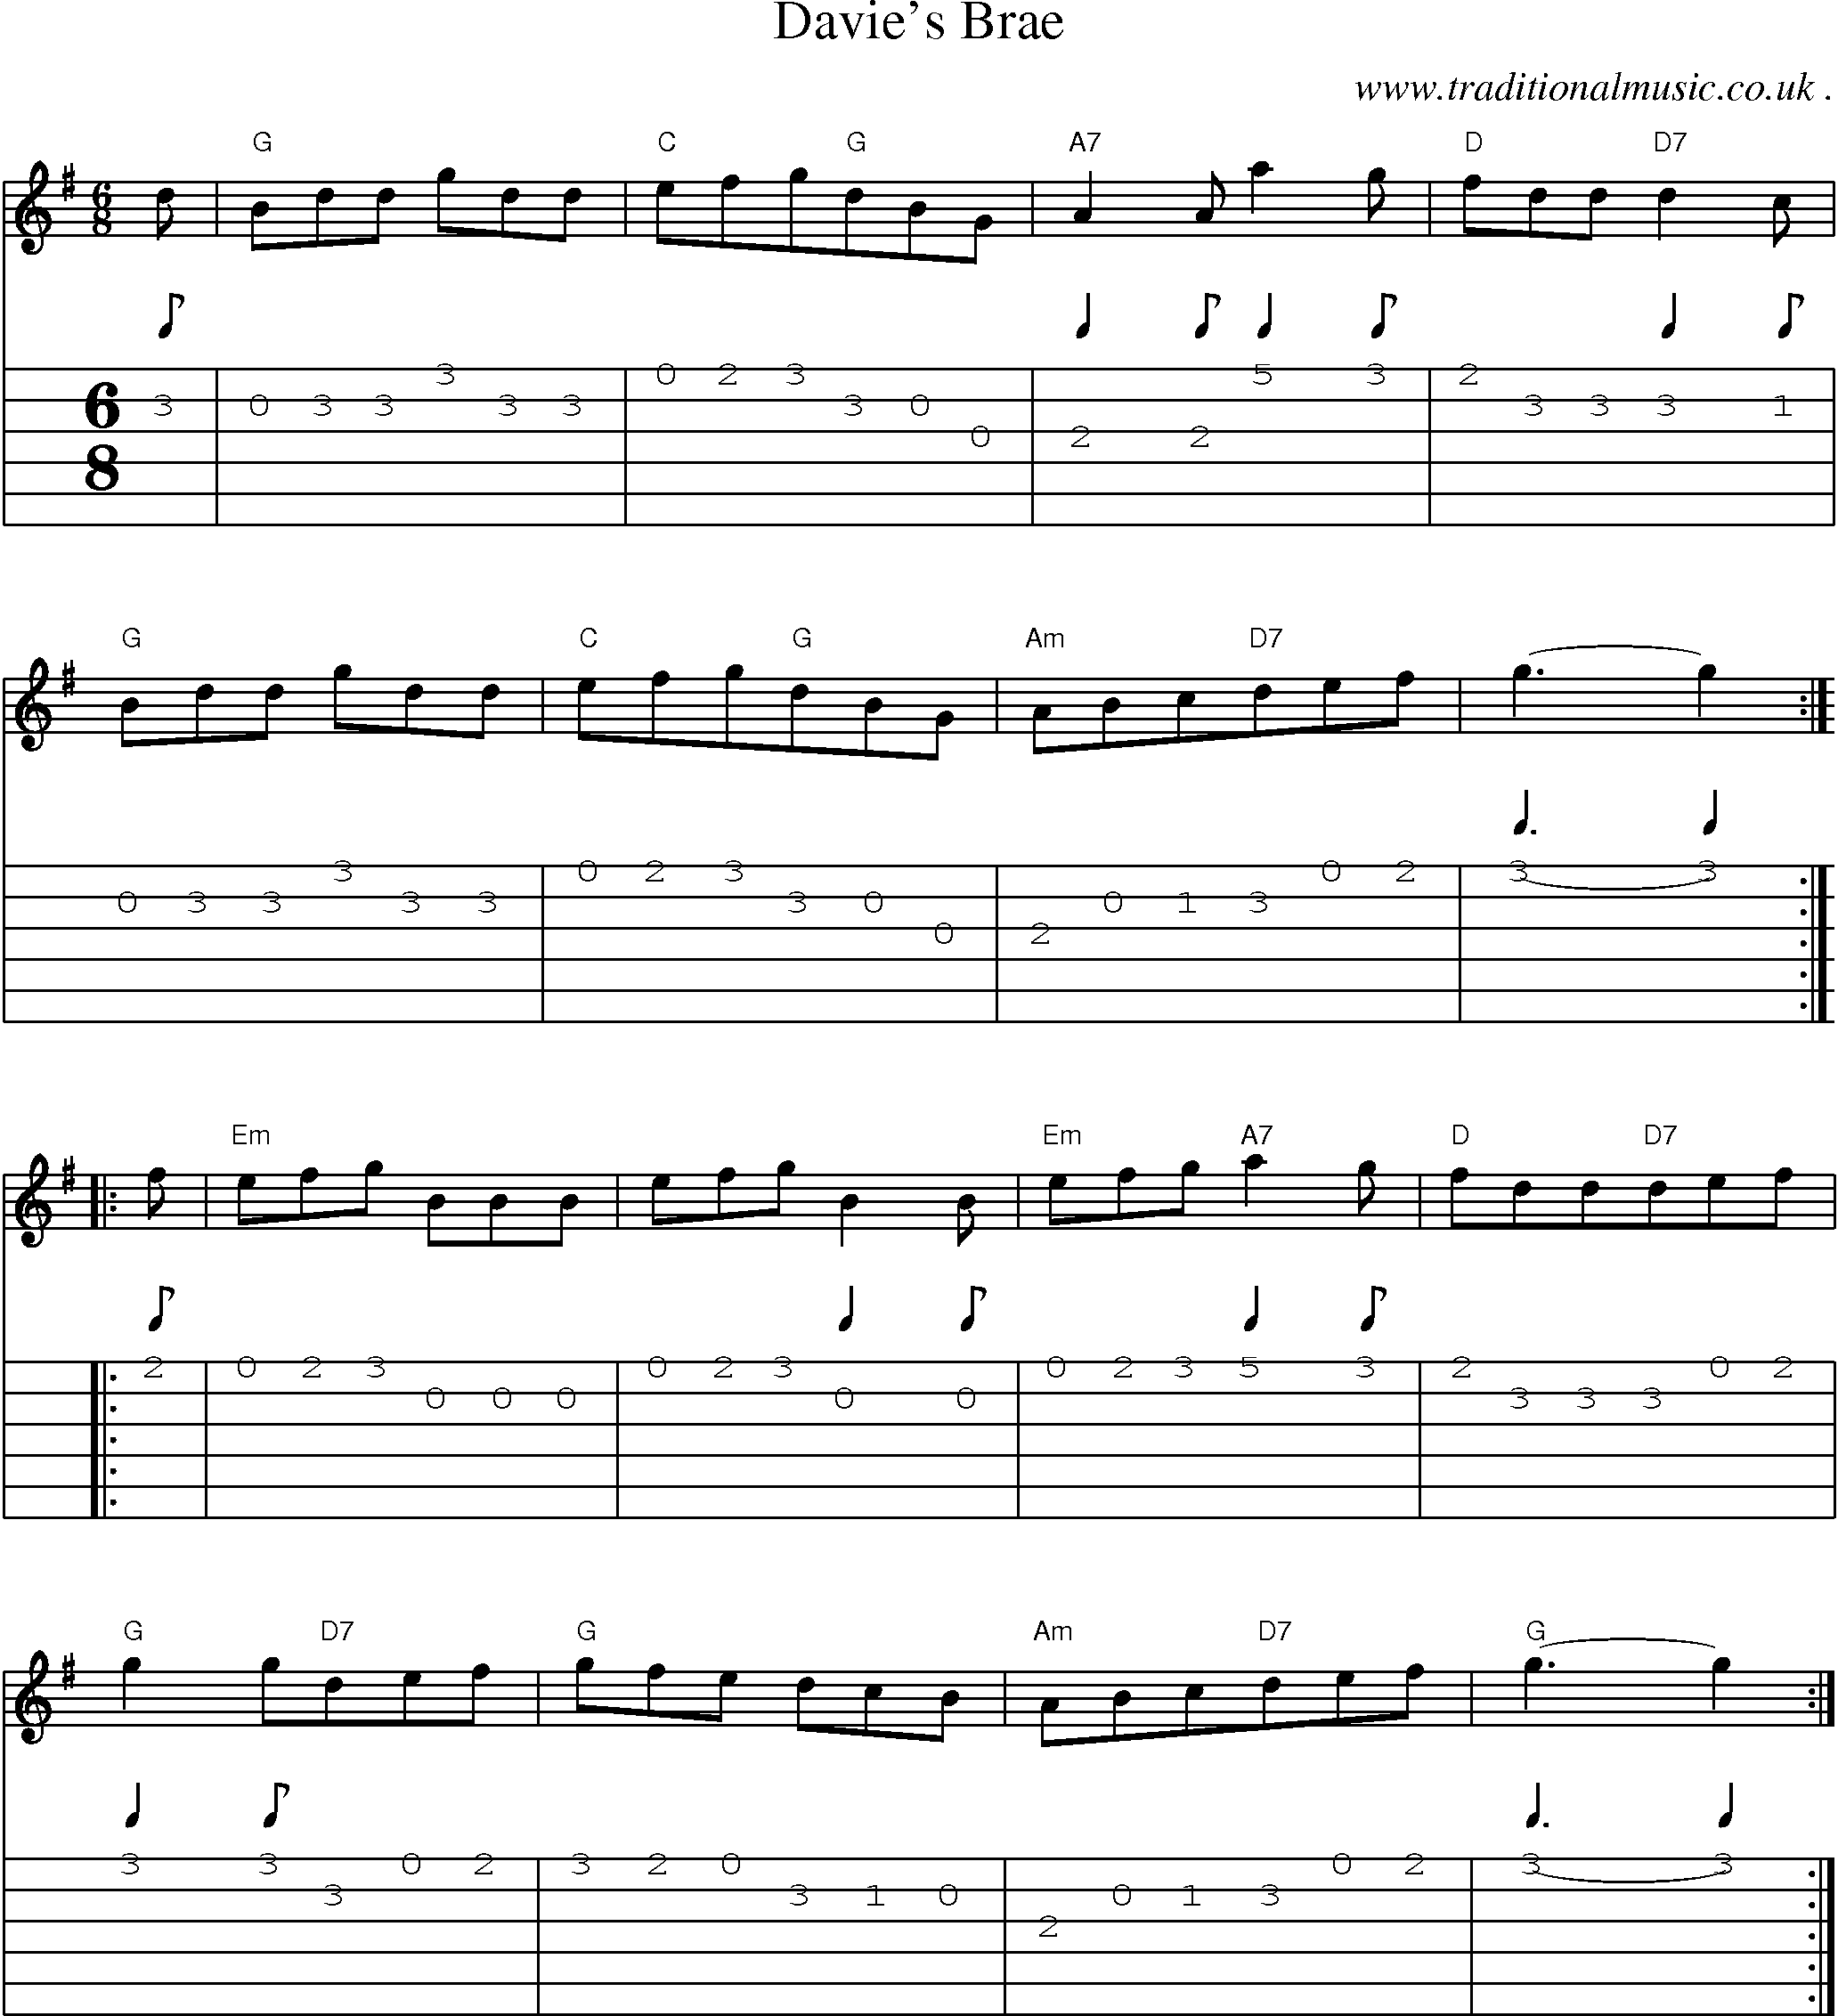 Sheet-Music and Guitar Tabs for Davies Brae